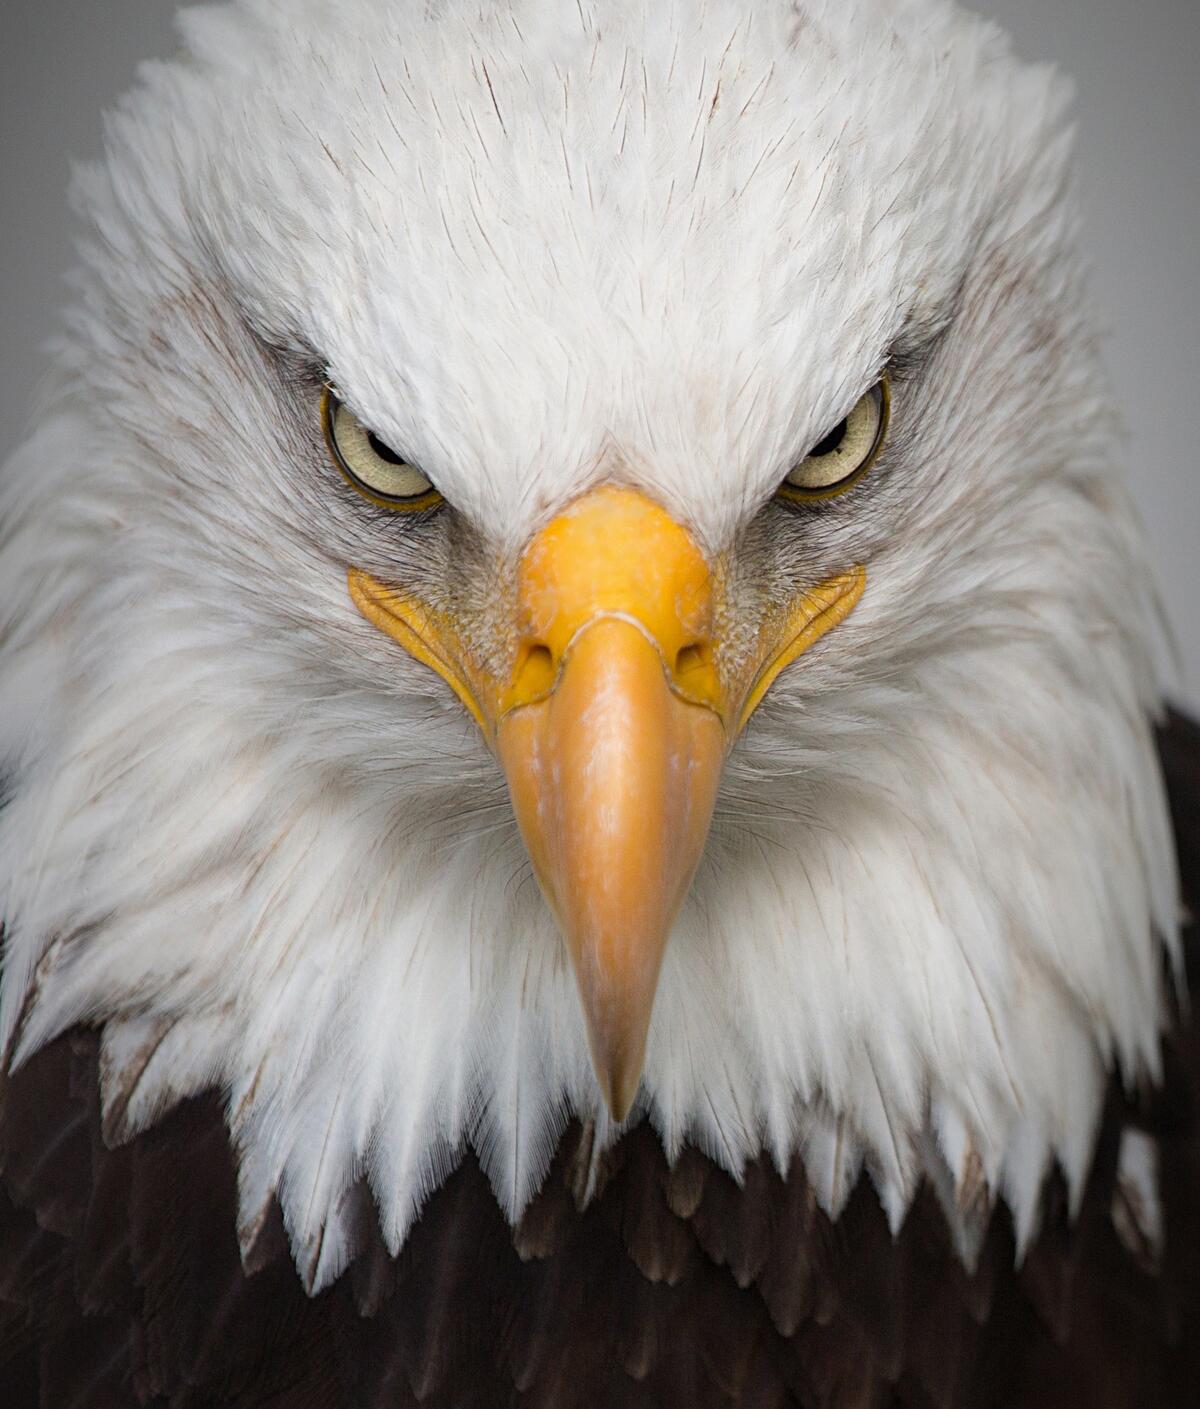 A close-up portrait of an eagle stares at the viewer